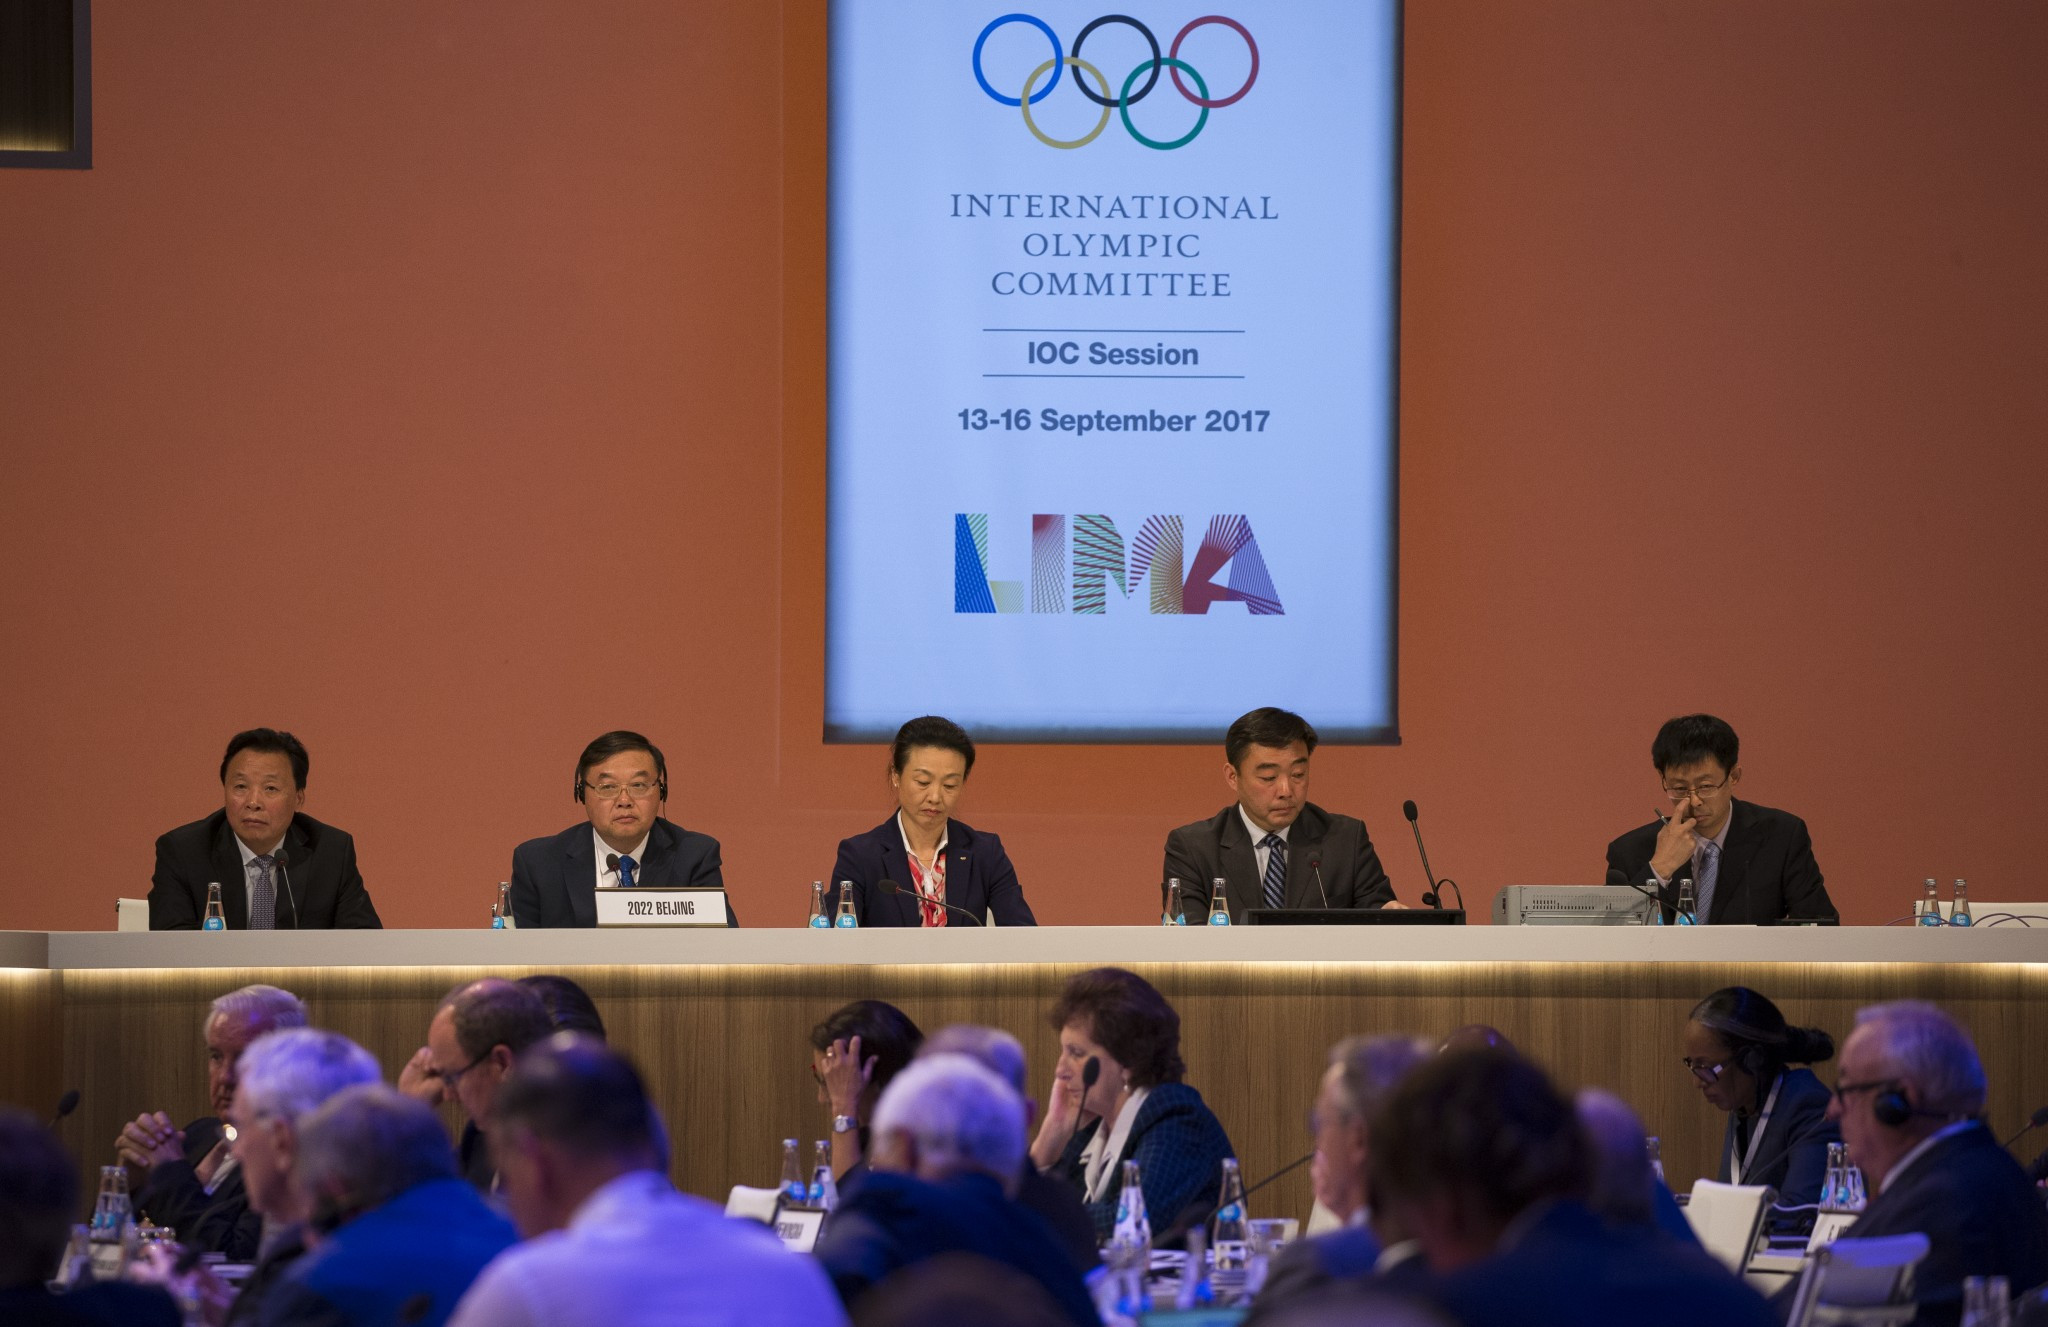 Beijing 2022 were praised for the strong start they have made to their preparations so far ©IOC